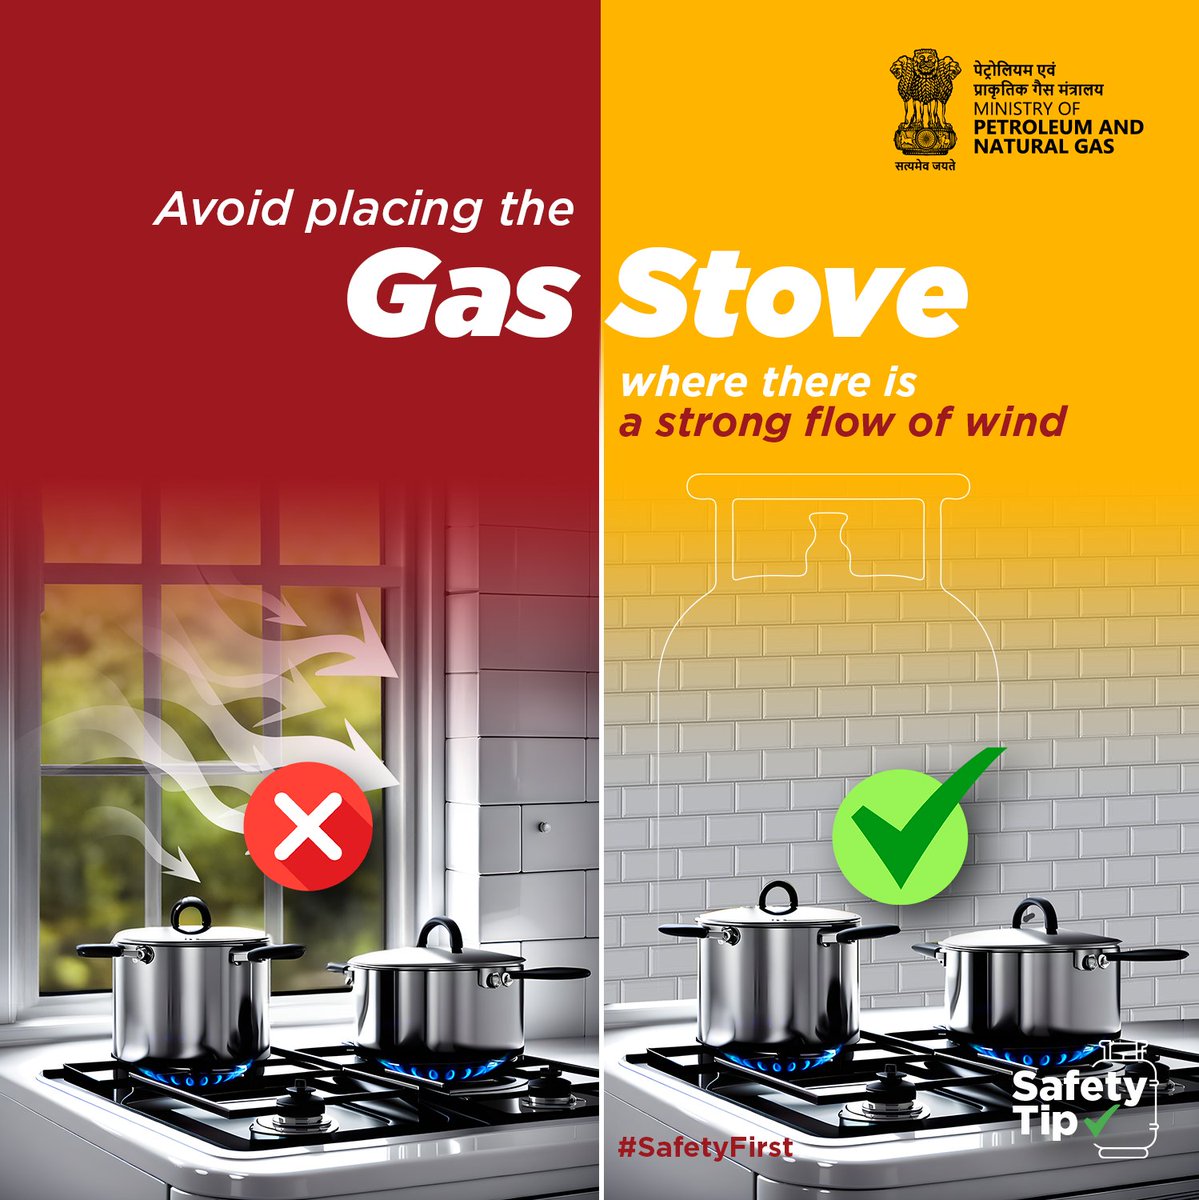 Safety Tip of the Day! 
Avoid placing your gas stove in areas with strong winds. Optimal positioning ensures your cooking experience is both efficient and safe. 
#SafetyTip #LPGSafety #SafetyFirst